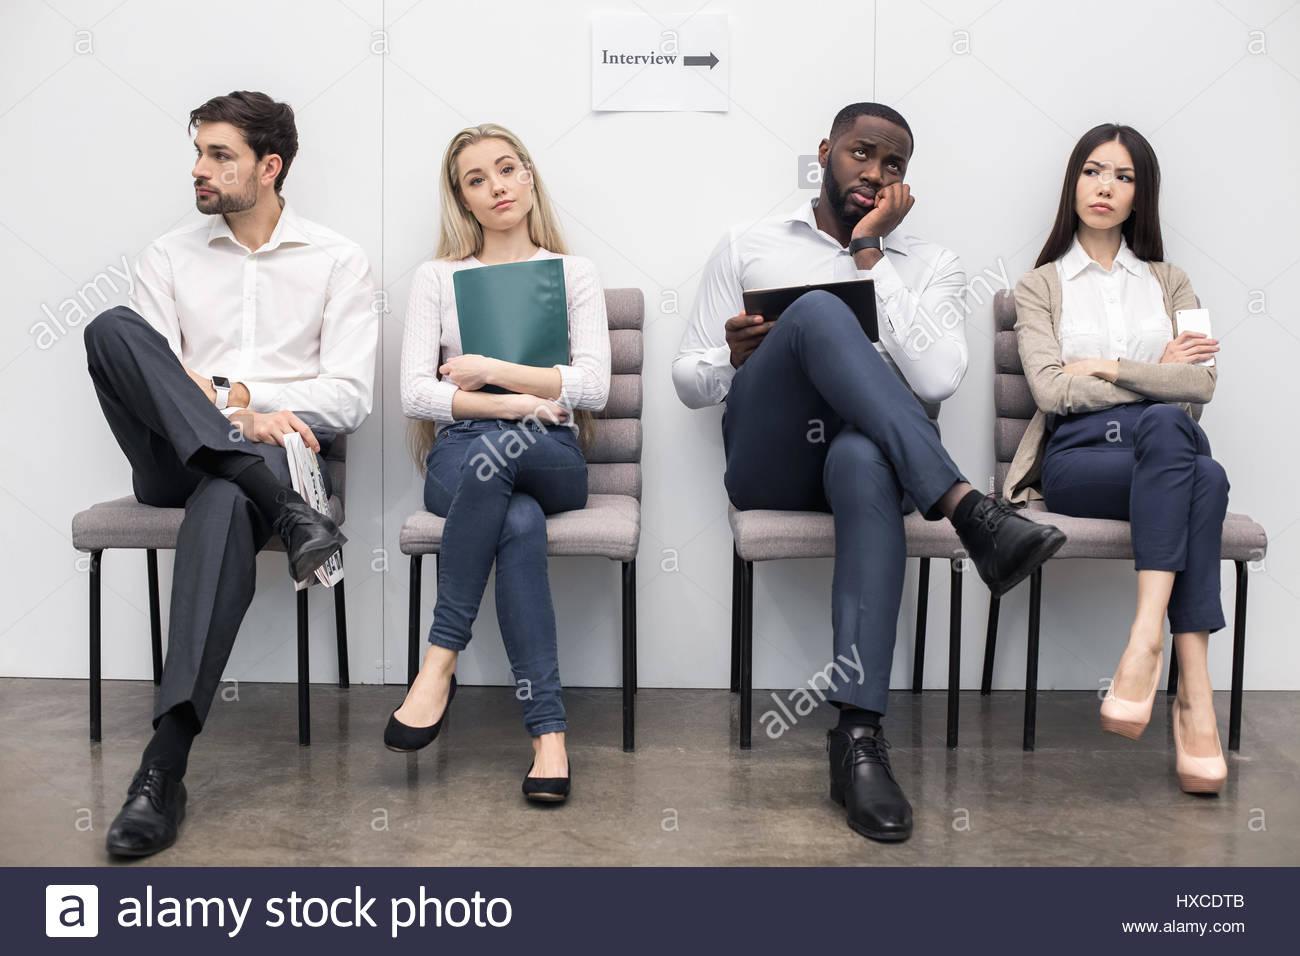 people-waiting-for-job-interview-concept